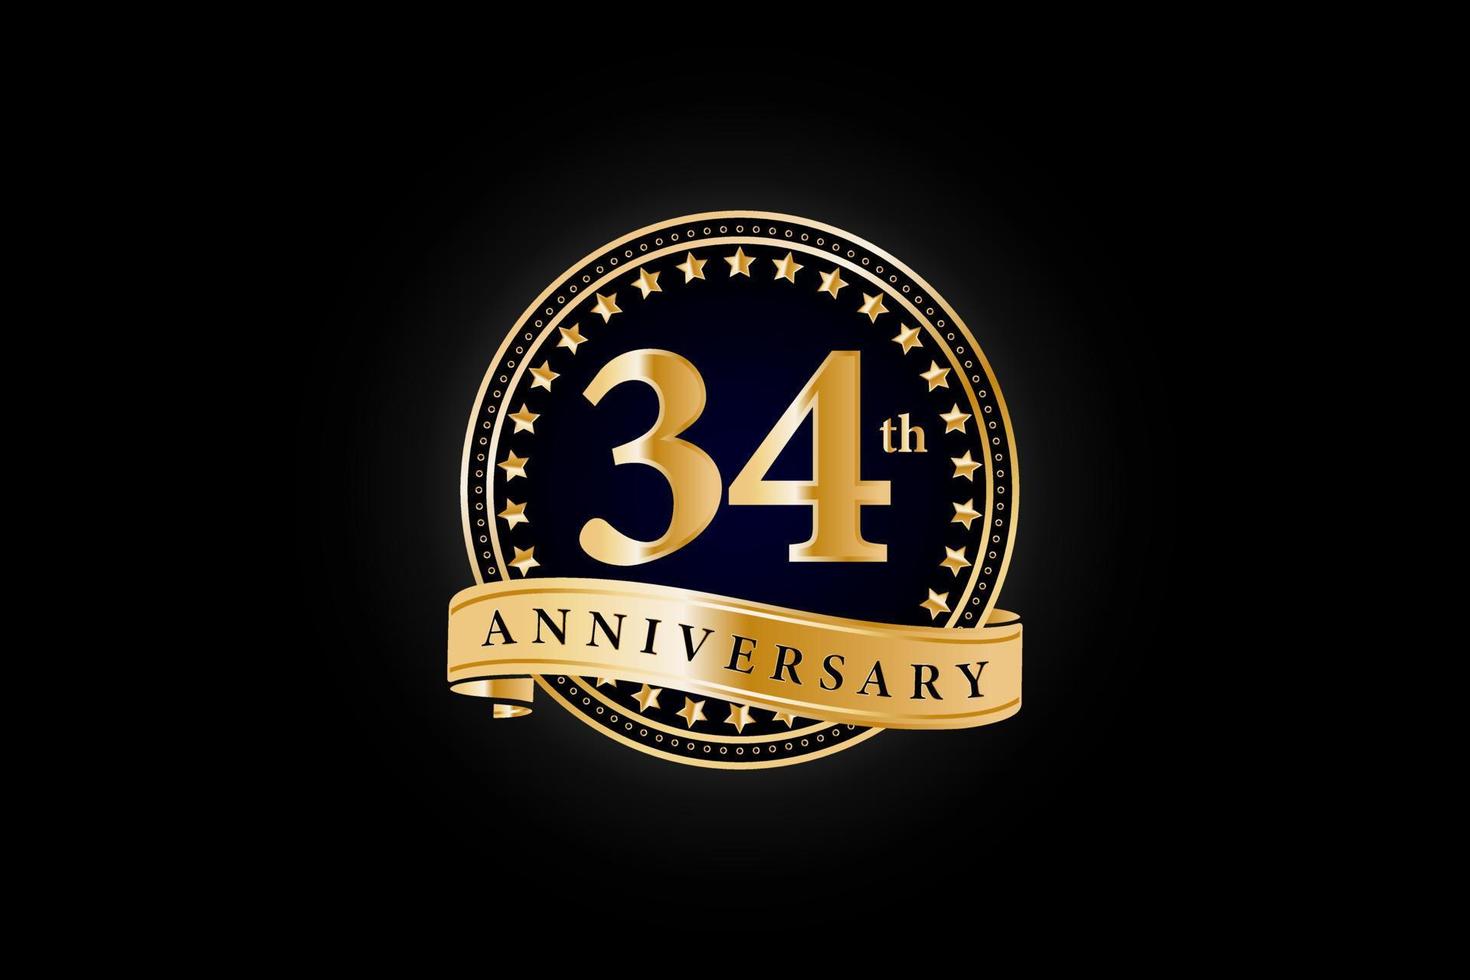 34th Anniversary golden gold logo with ring and gold ribbon isolated on black background, vector design for celebration.